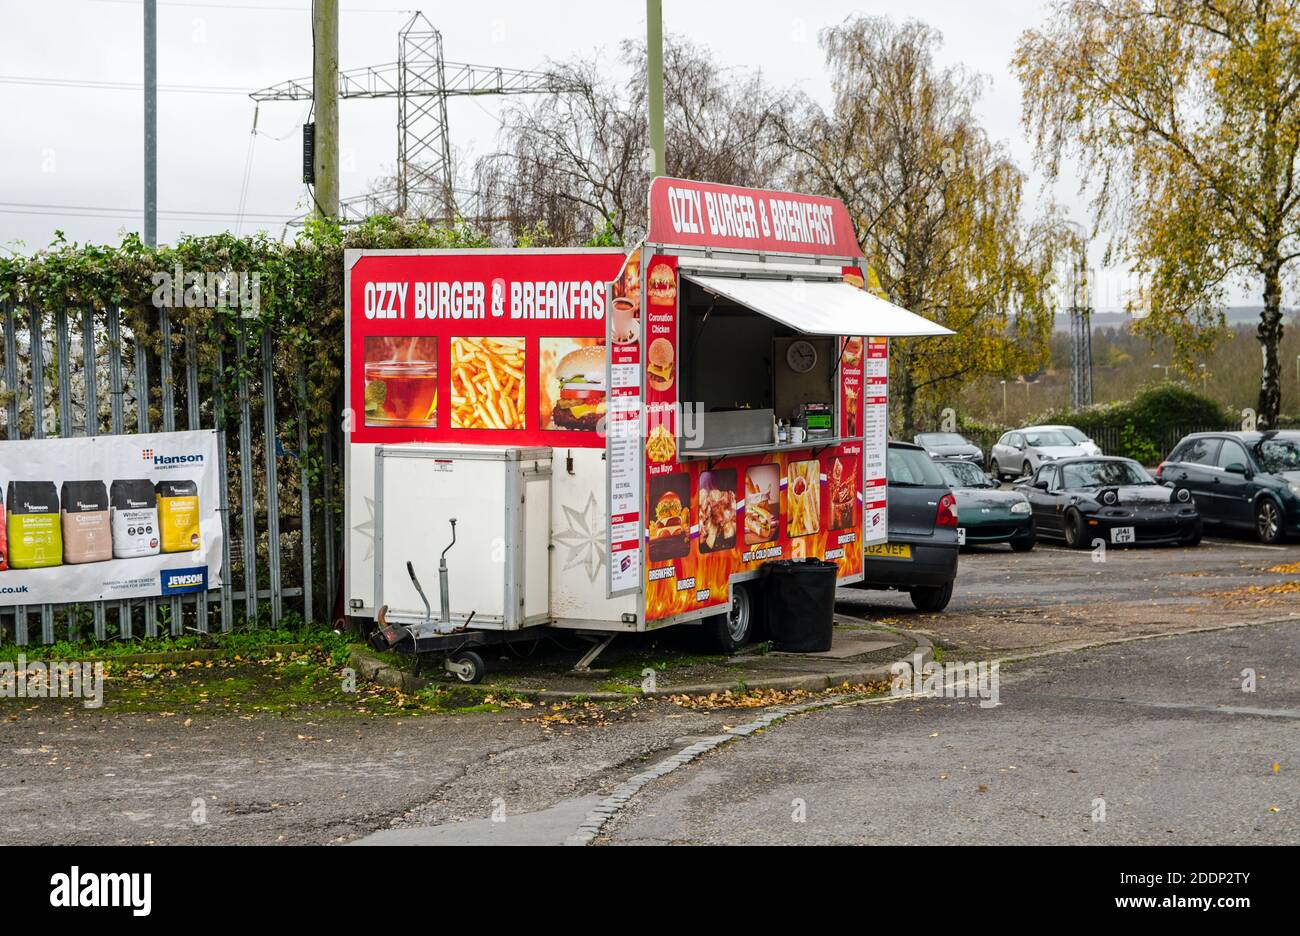 Basingstoke, UK - November 17, 2020: A mobile burger van parked in the Daneshill East Industrial Estate in Basingstoke, Hampshire on a cloudy autumn d Stock Photo